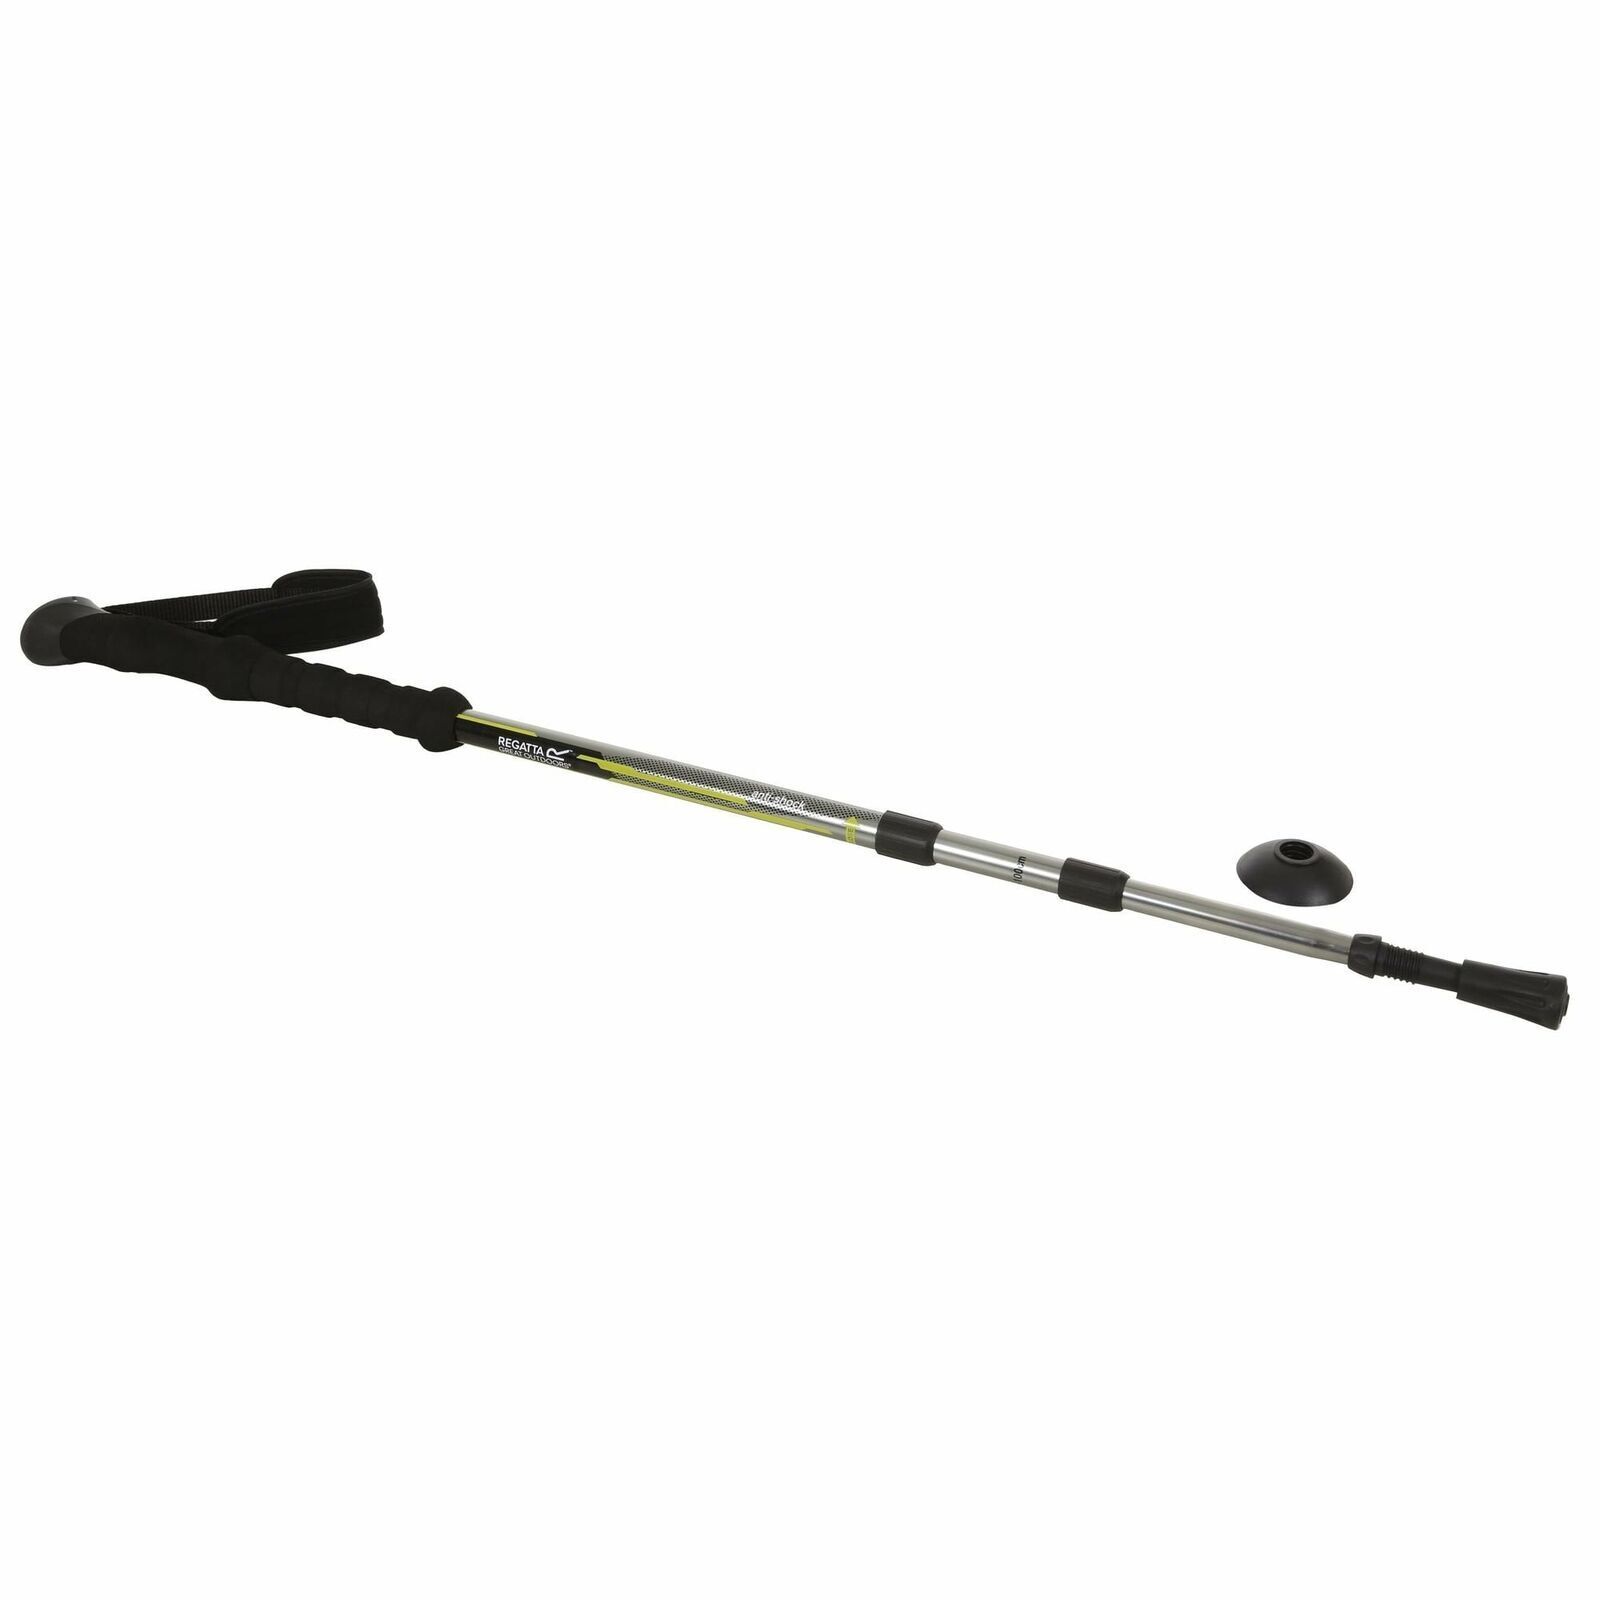 Lightweight aluminium tubing. Telescopic height adjustment. Moulded rubber grip handle. Adjustable wrist support. Anti shock absorber.